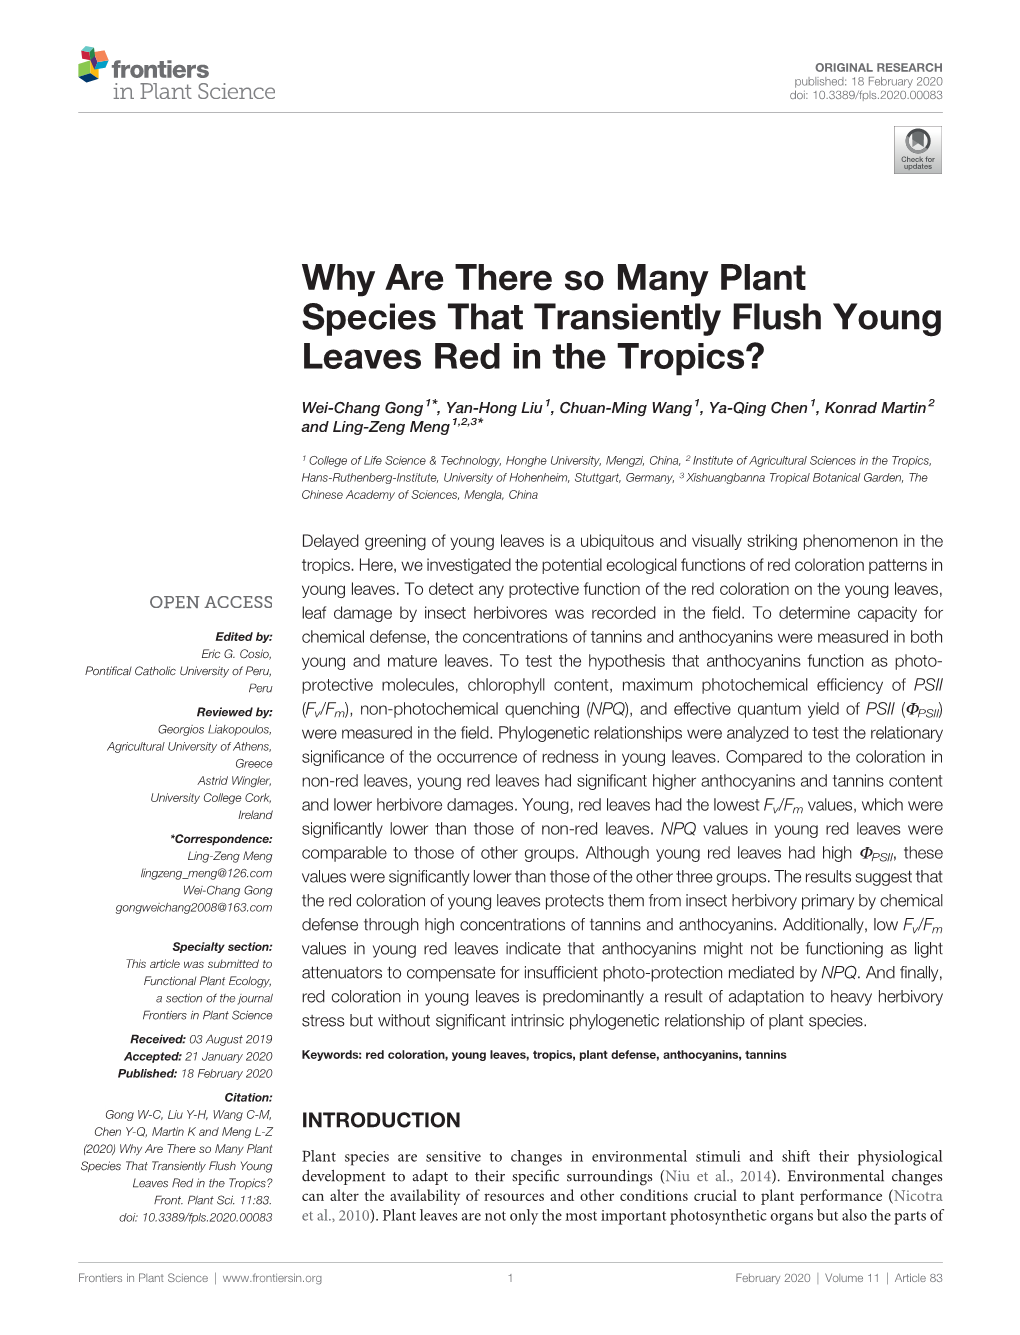 Why Are There So Many Plant Species That Transiently Flush Young Leaves Red in the Tropics?